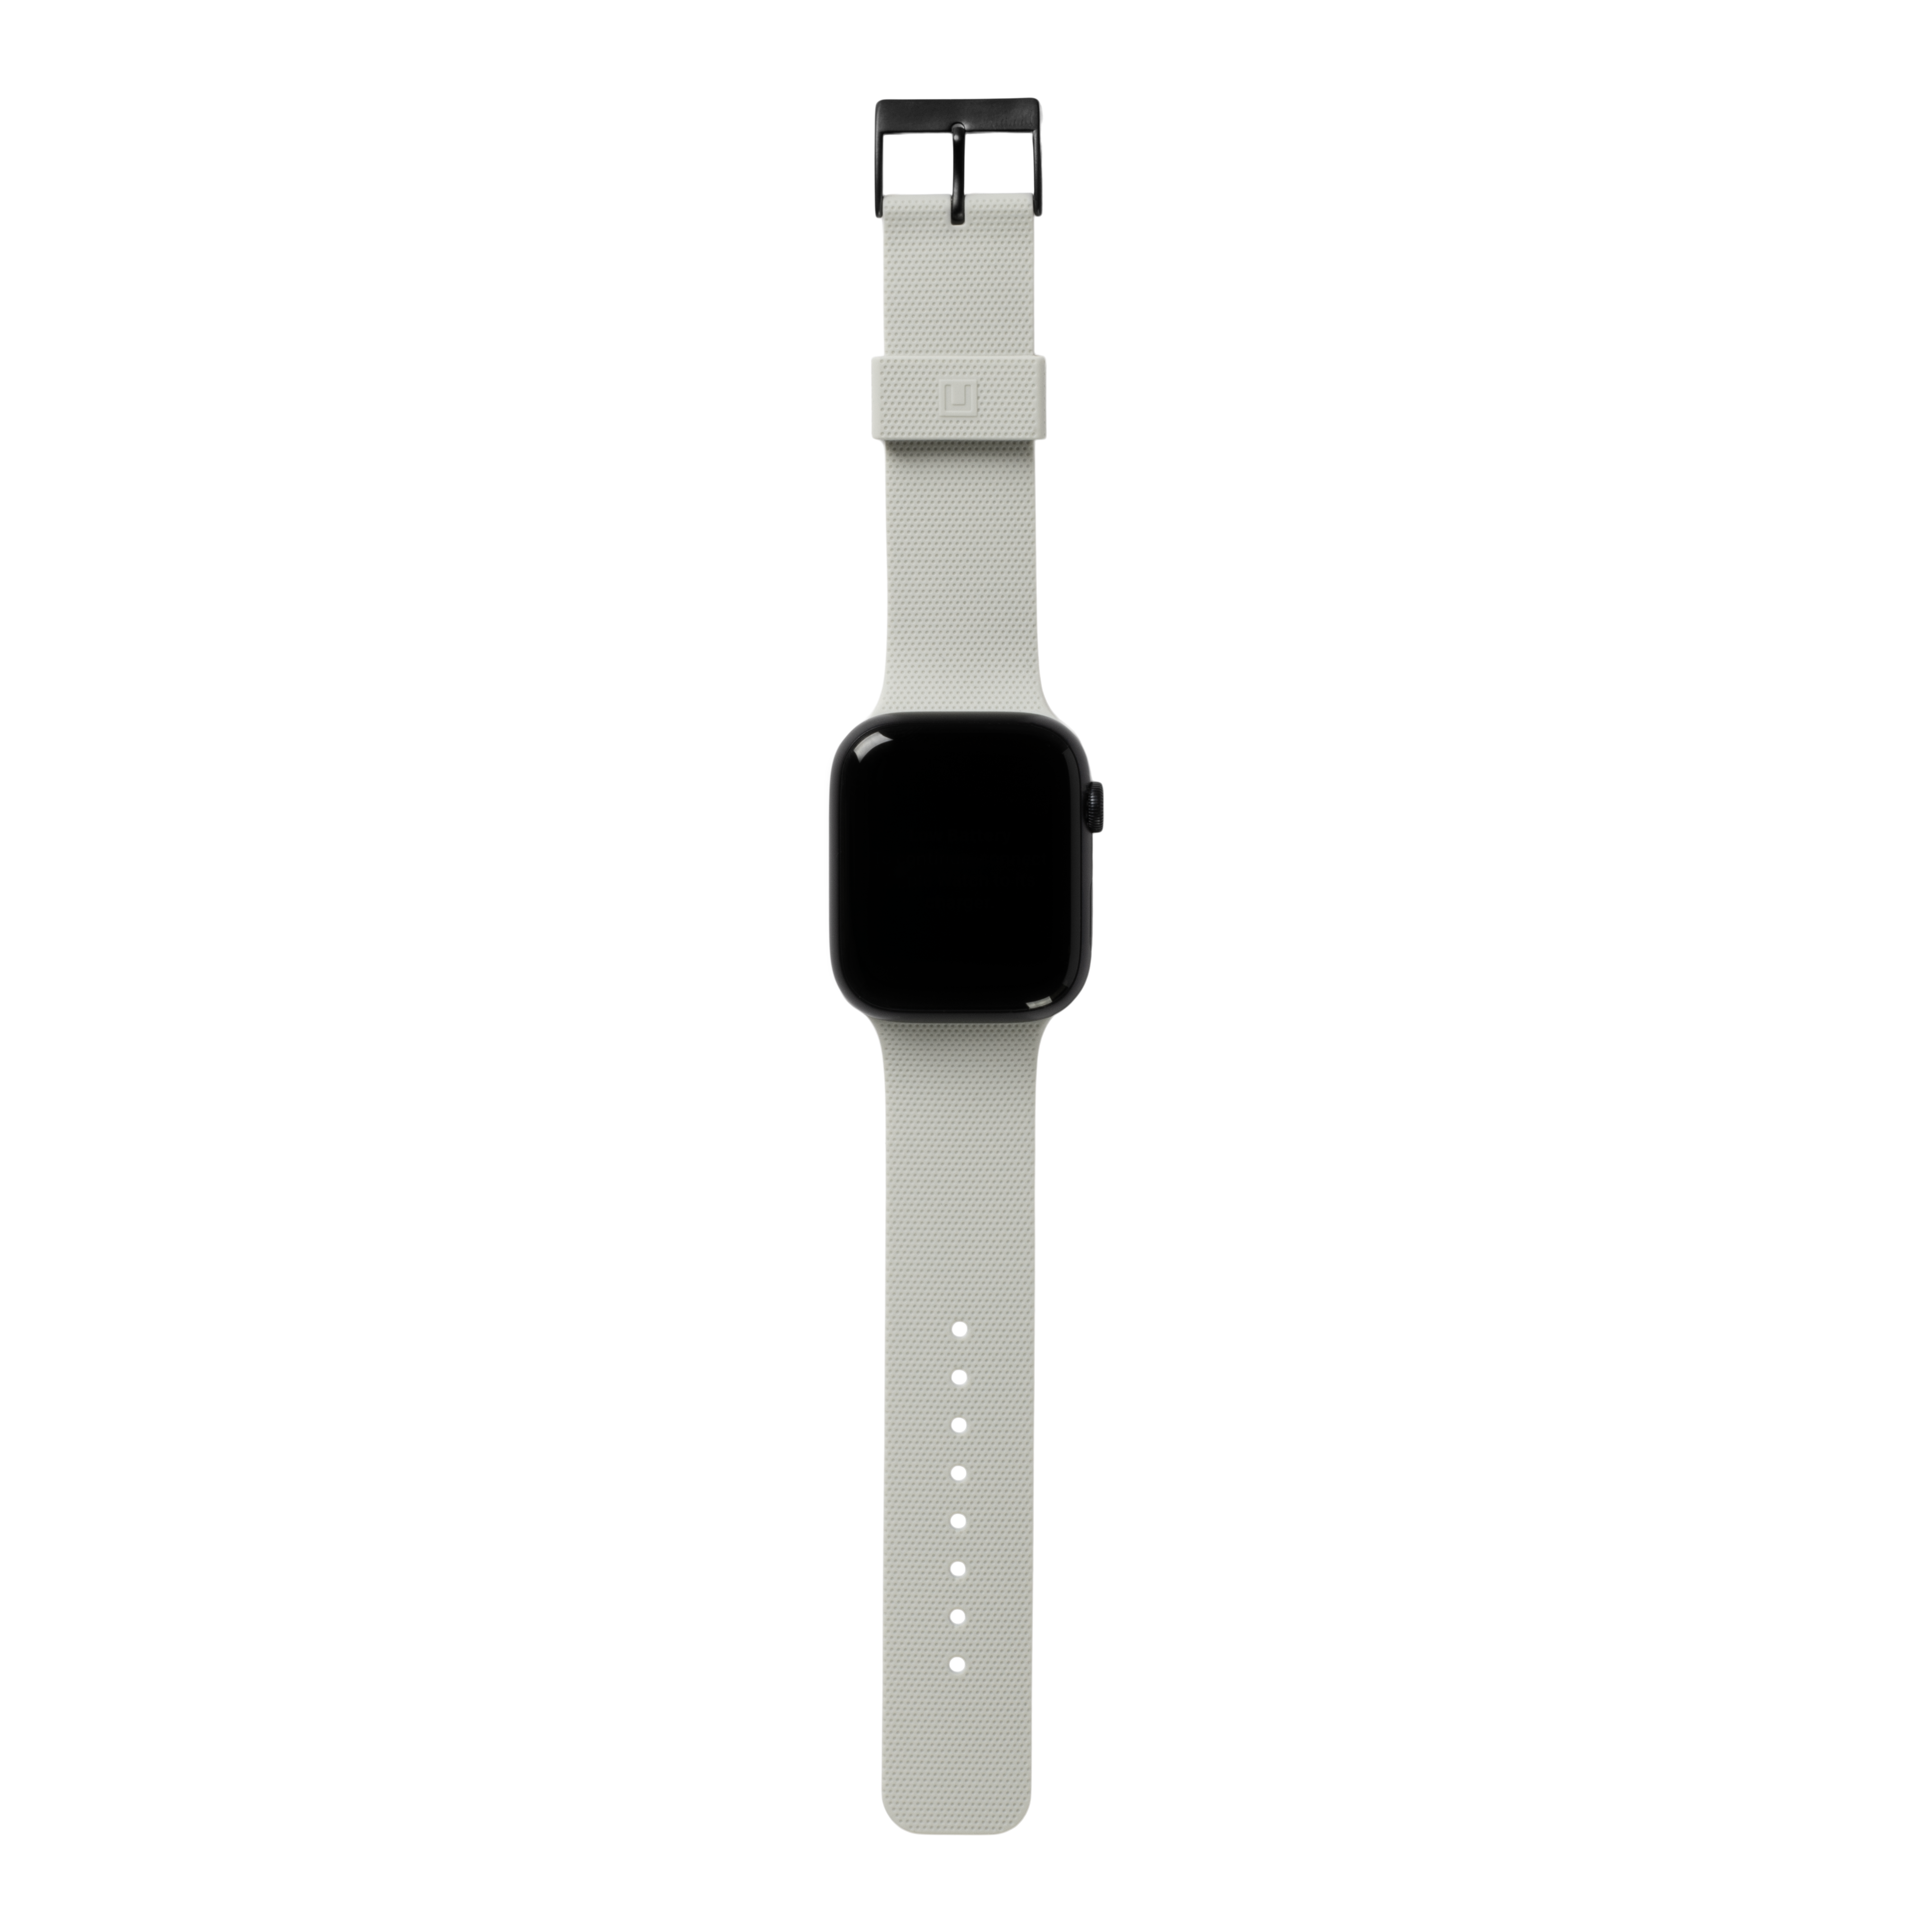 UO Silicone Apple Watch Band  Urban Outfitters Mexico - Clothing, Music,  Home & Accessories